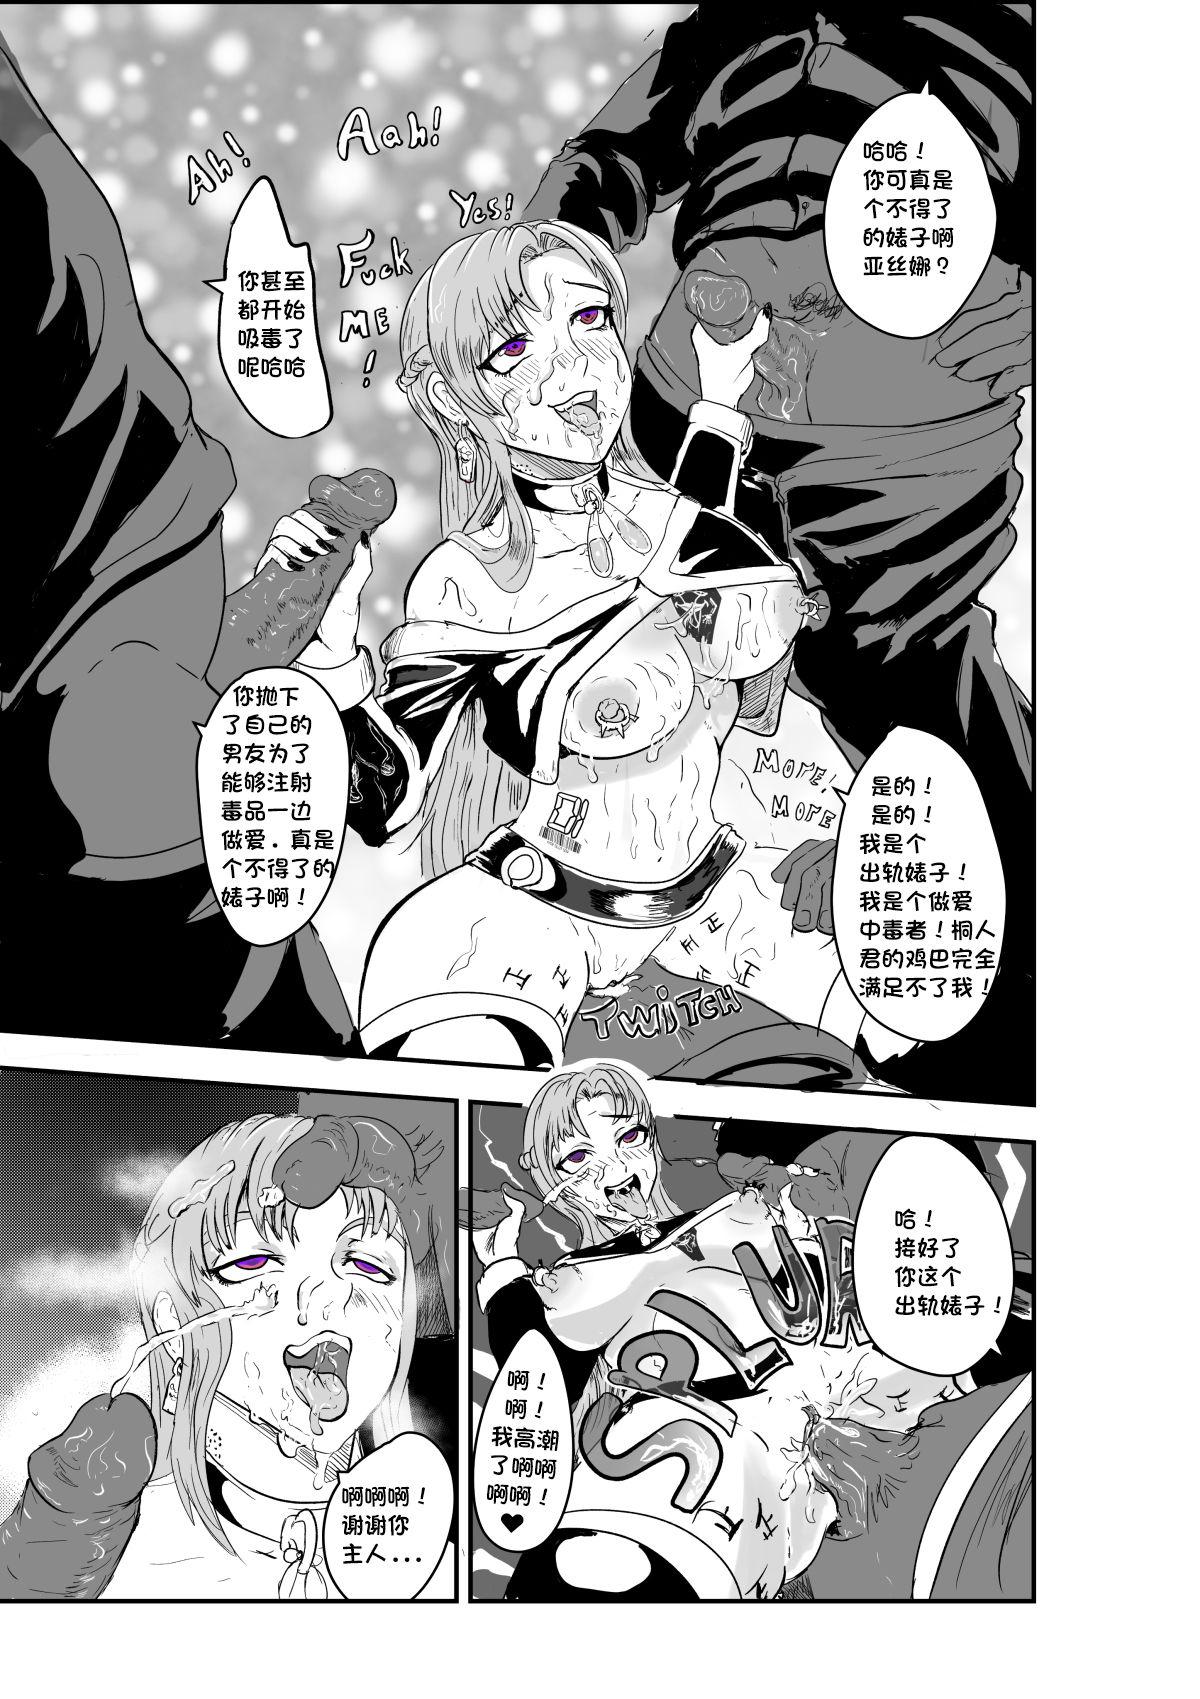 Latina SAO Lustful Obedience Release - Sword art online Sub - Page 5